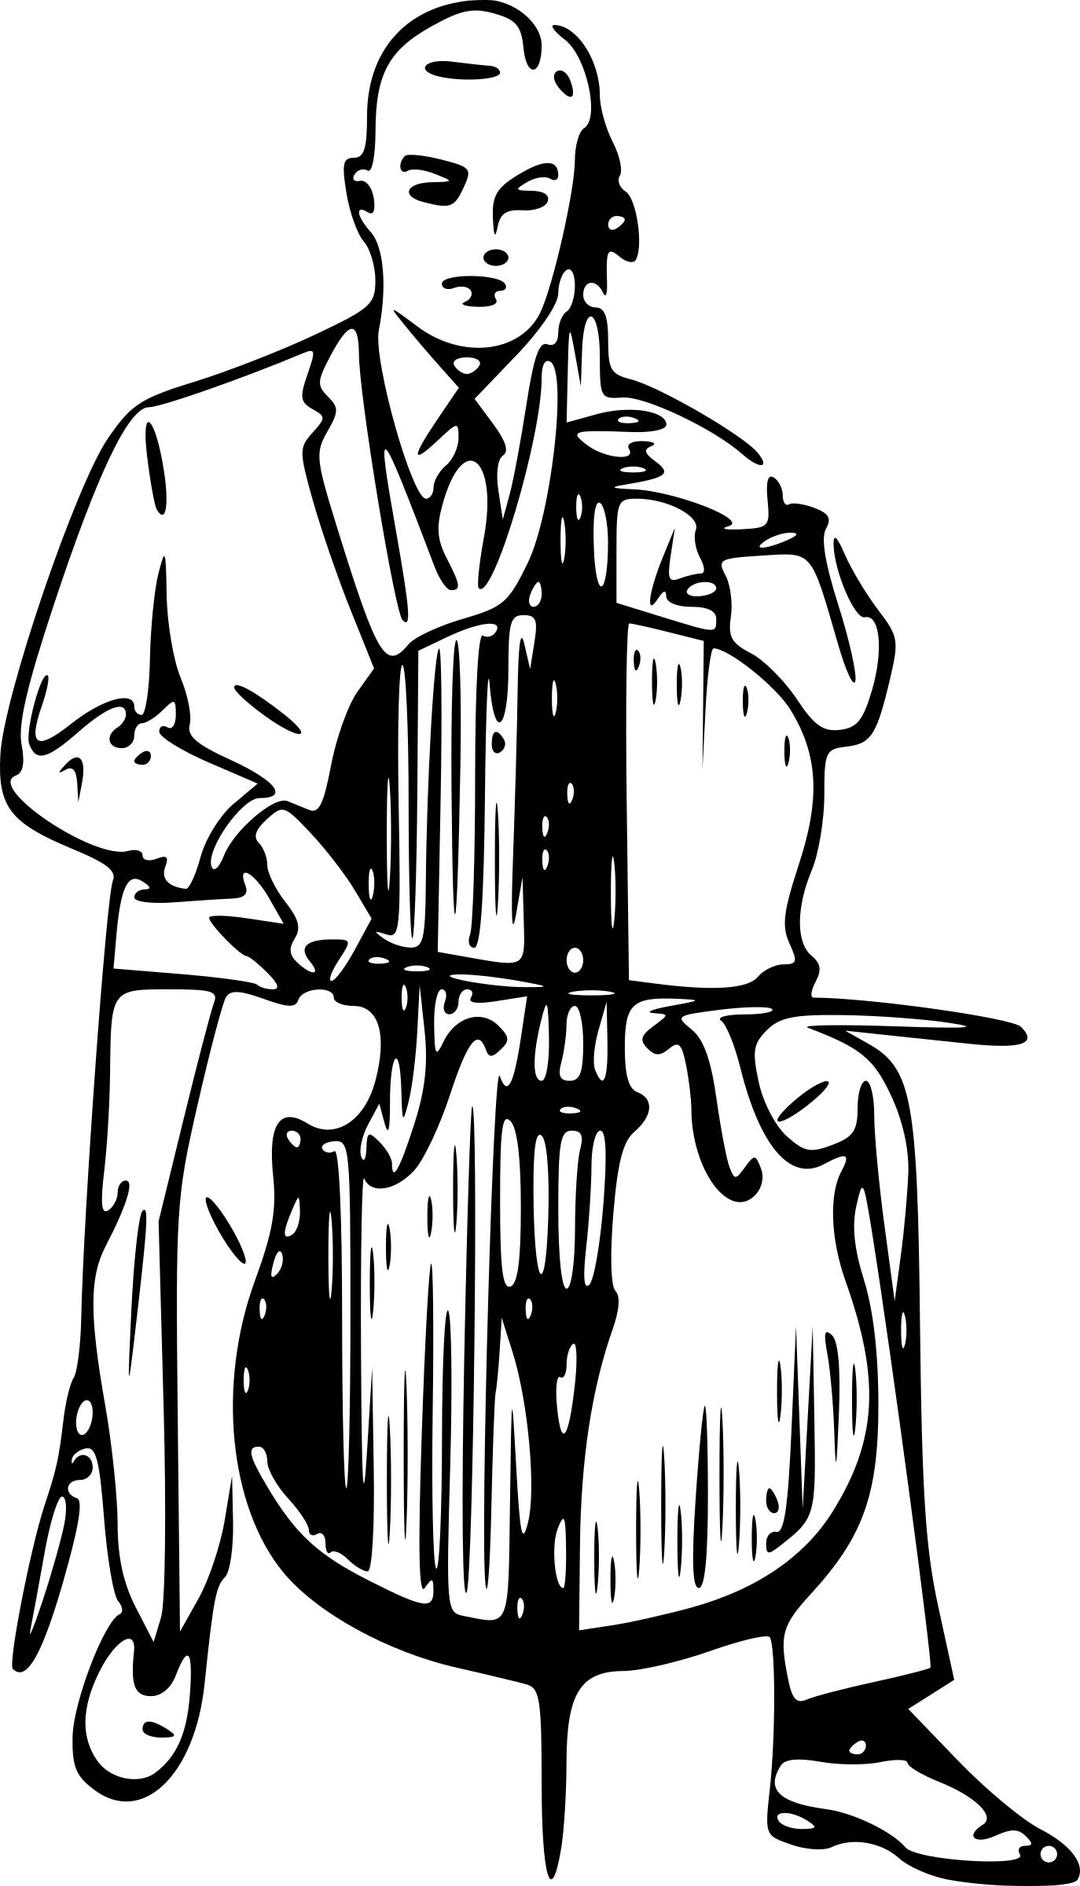 Man playing cello png transparent